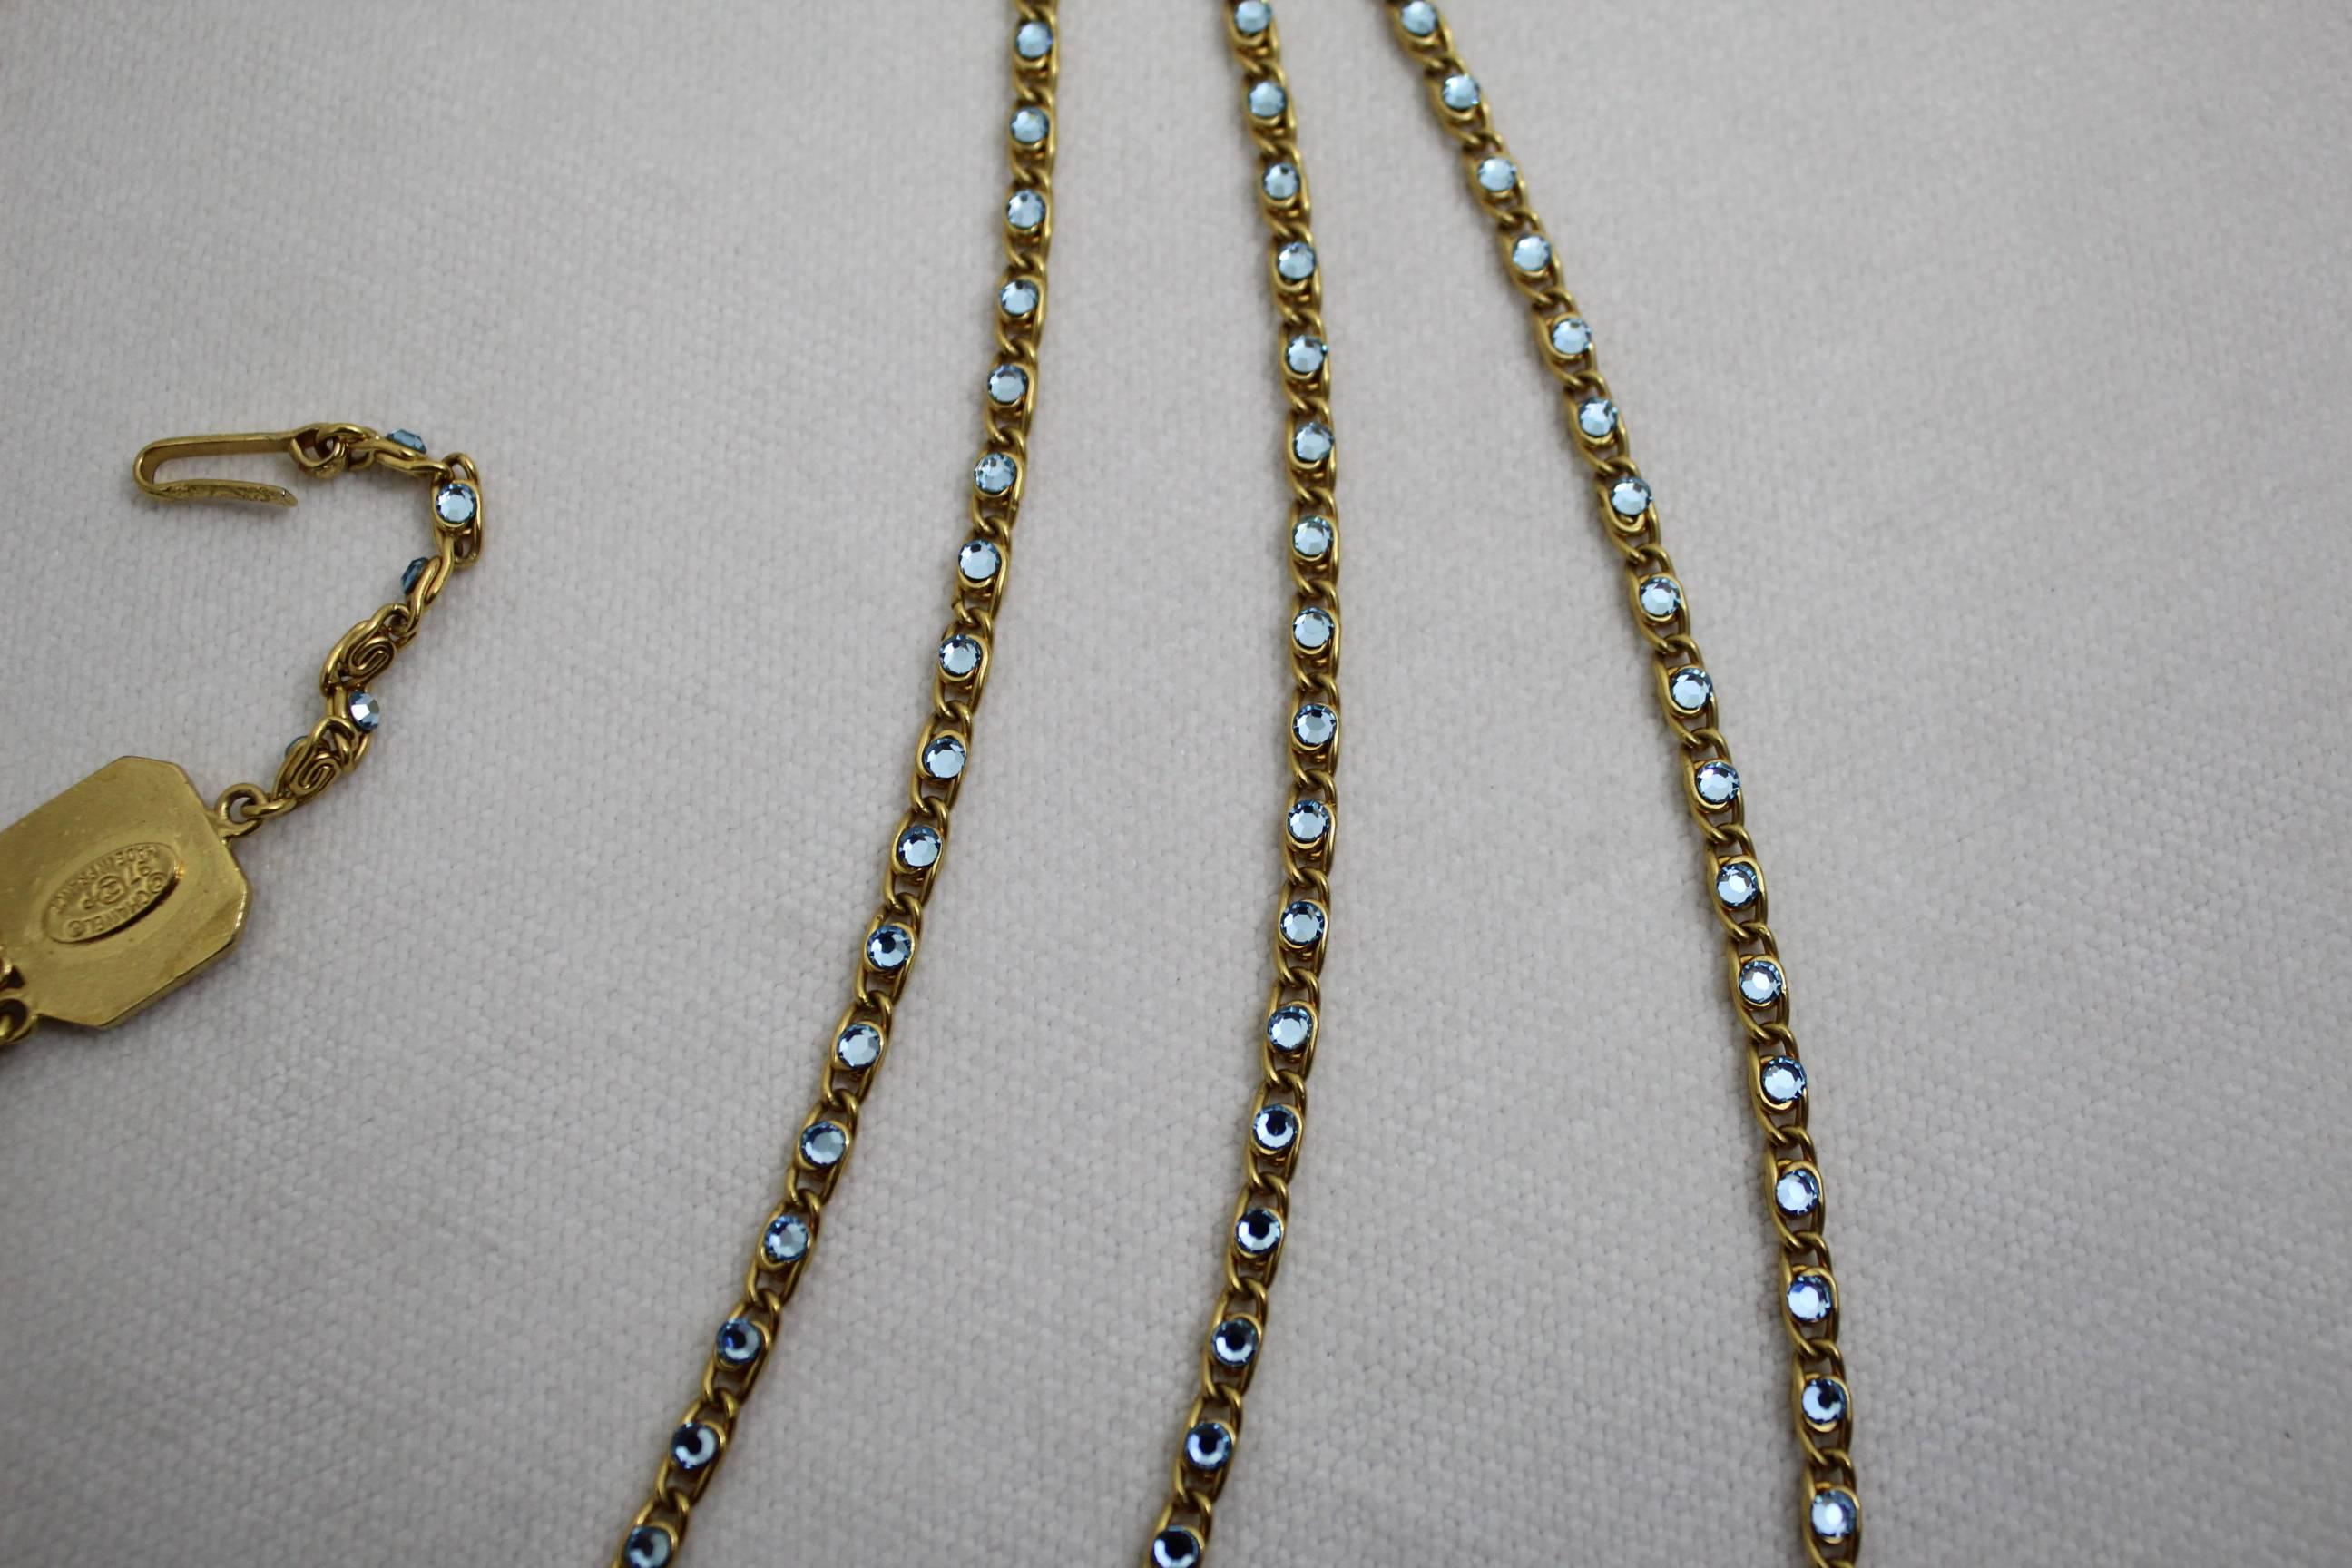 Sophisticated 1997 Chanel Necklace with blue stones and gold plated metal. 1